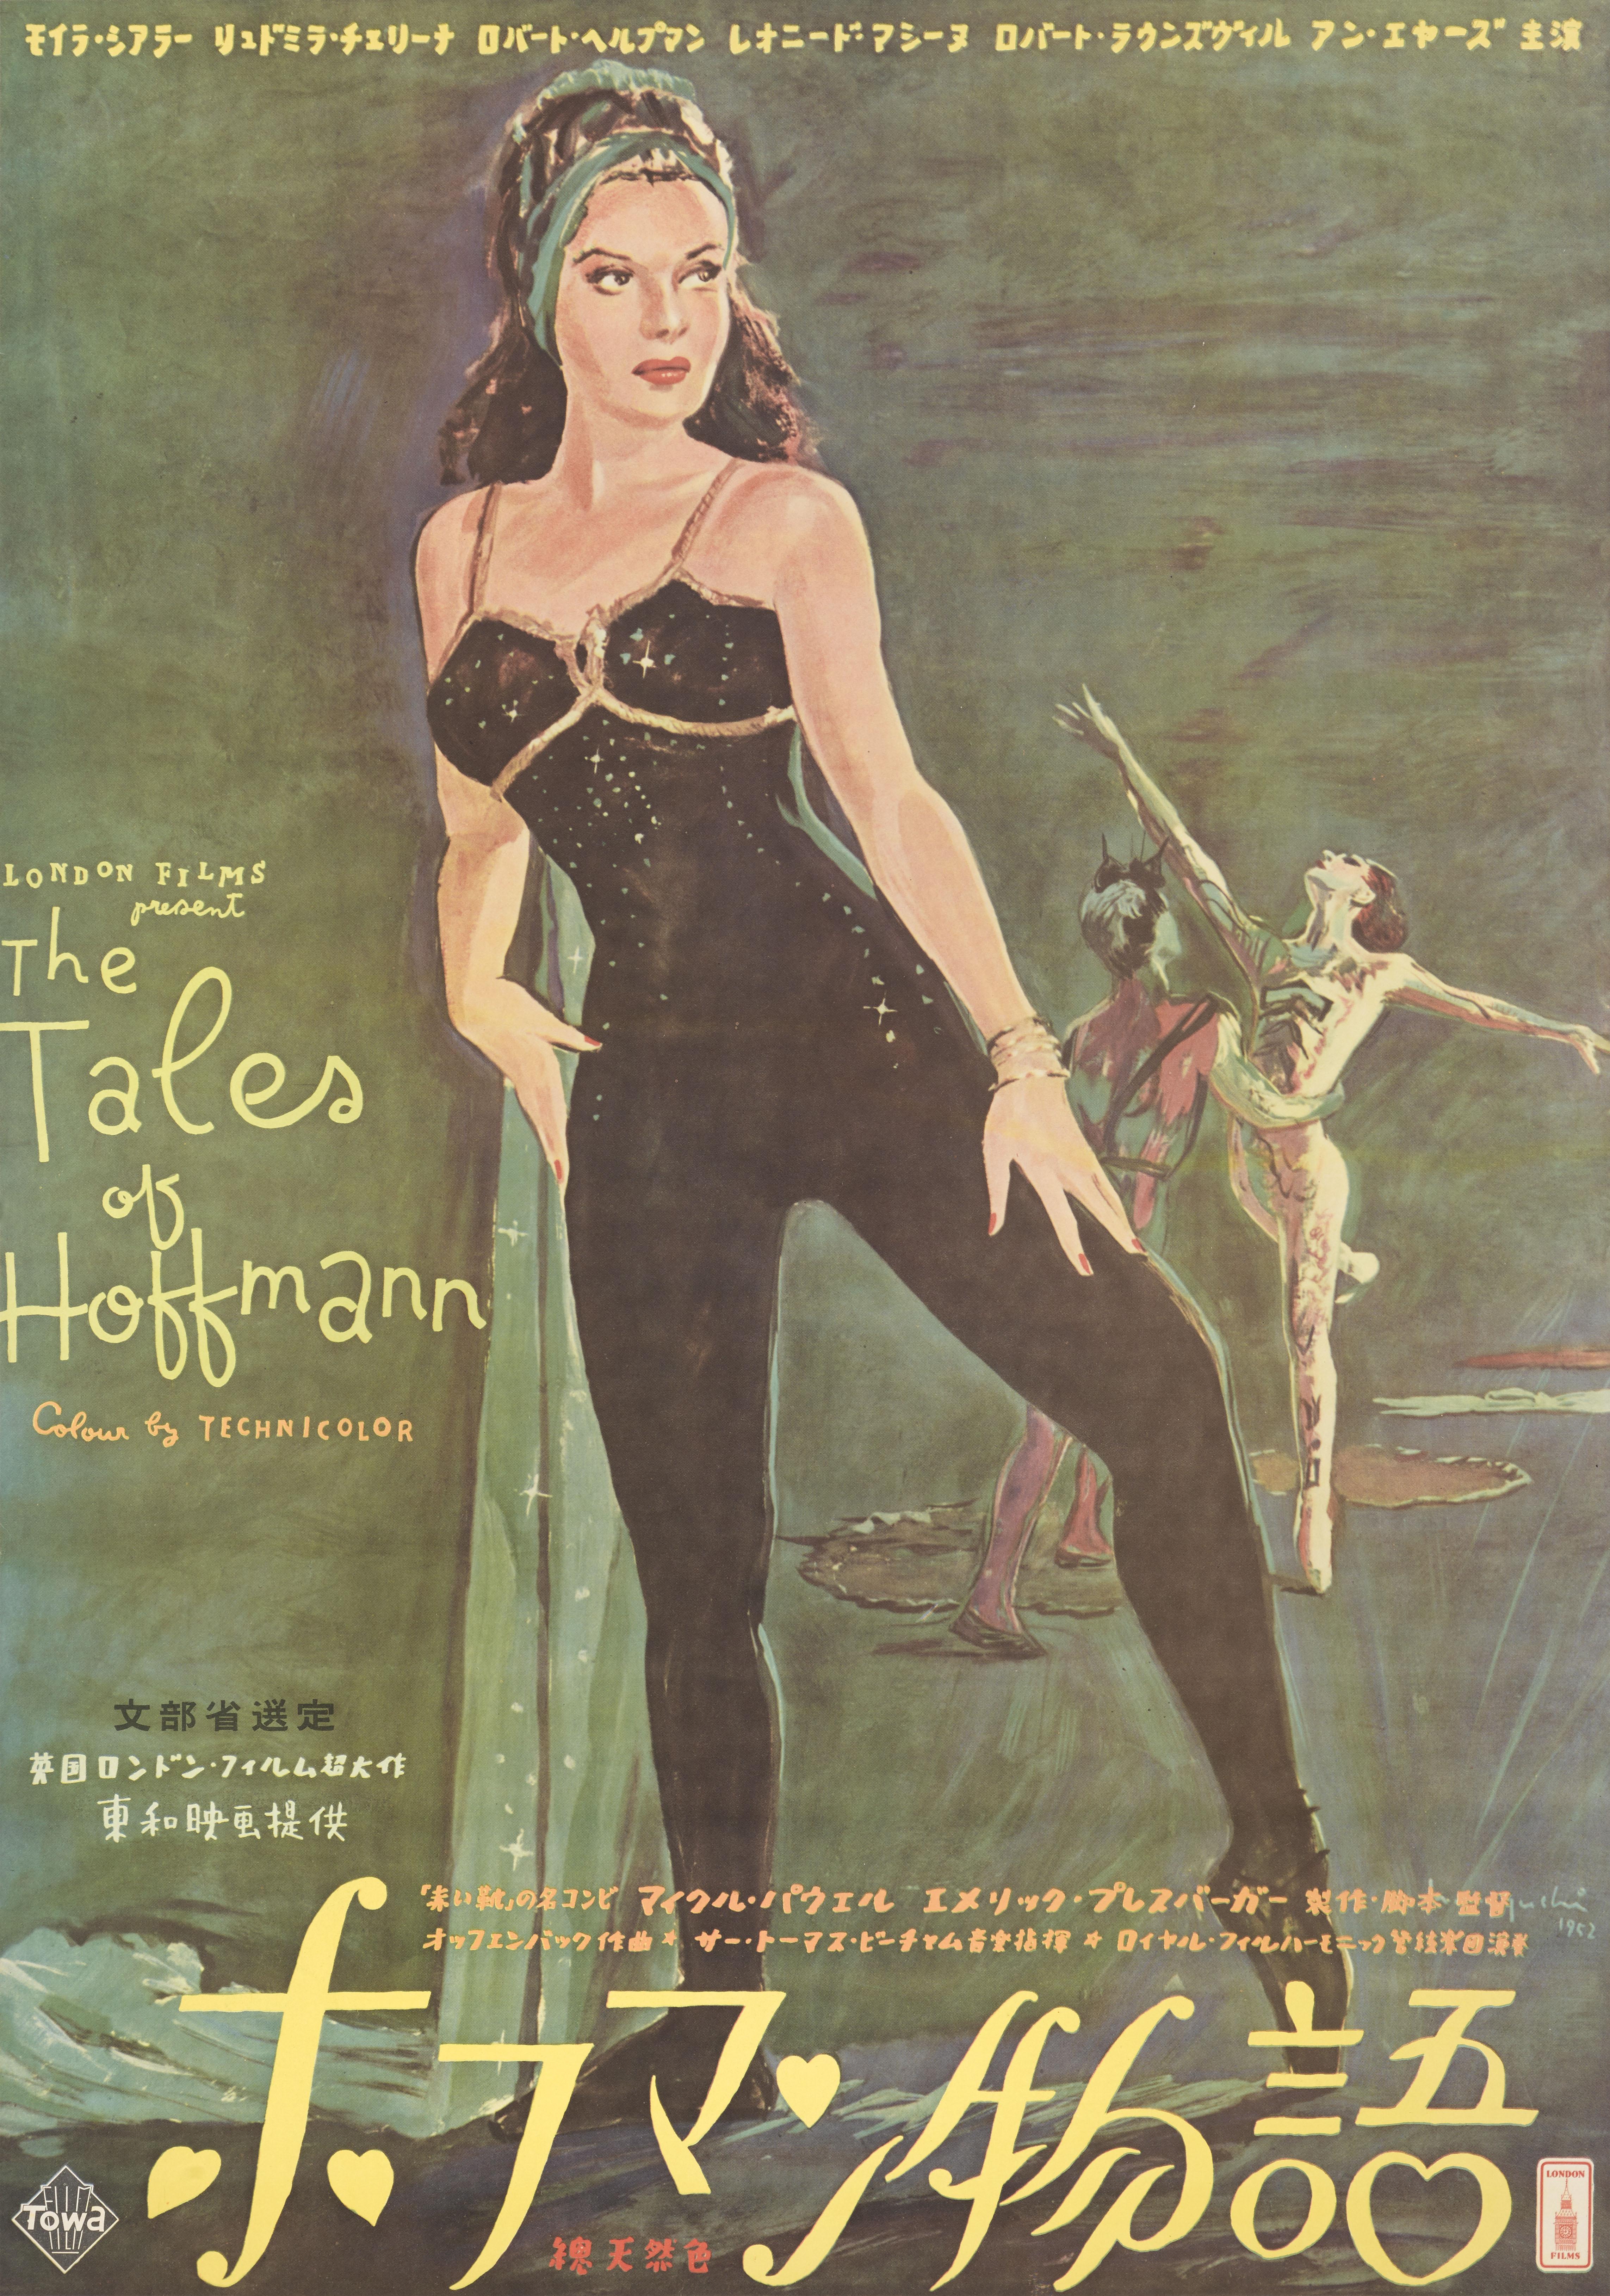 Original Japanese film poster for The Tales of Hoffmann 1951.
This film was directed by Michael Powell and Emeric Pressburger and stars Moira Shearerand Robert Rounseville.
This poster was created for the films first Japanese release in 1952
The